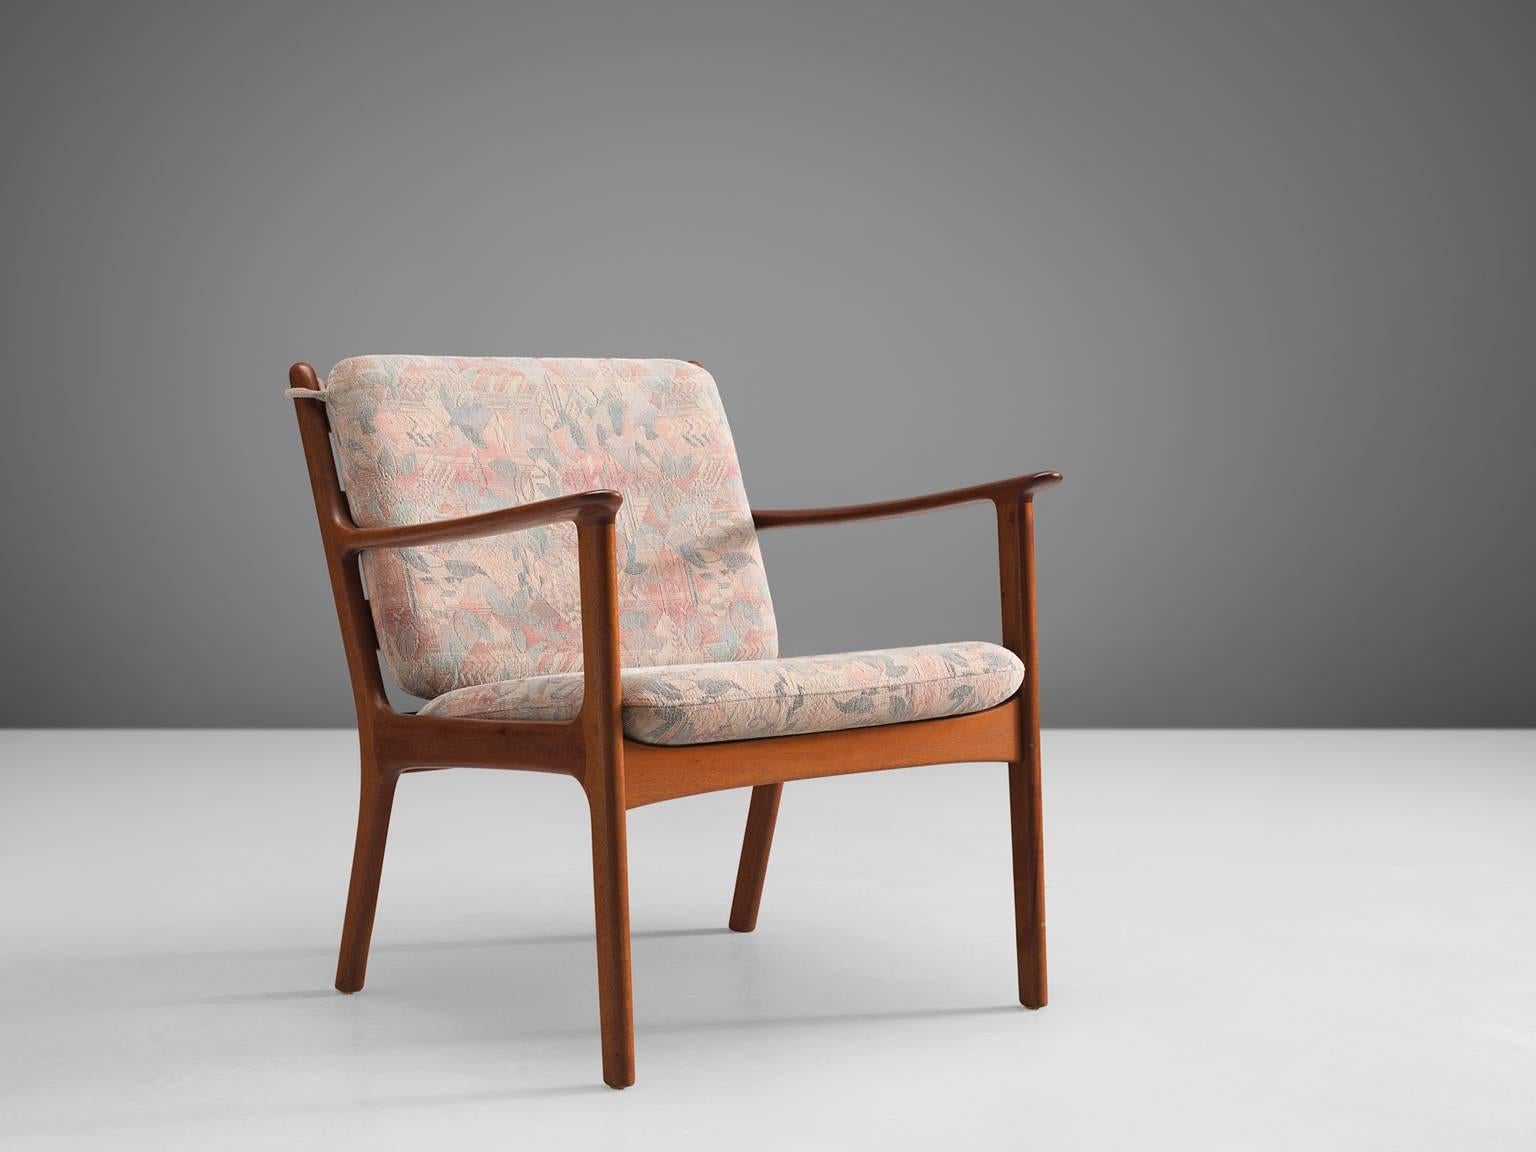 Kaj Winding, chair, teak, pink patterned fabric, Denmark, 1950s.

This delicate Danish chair is designed by Kaj Winding. The frame shows elegant lines, especially in the armrests. The sofa is executed with tilted back, by means of which a